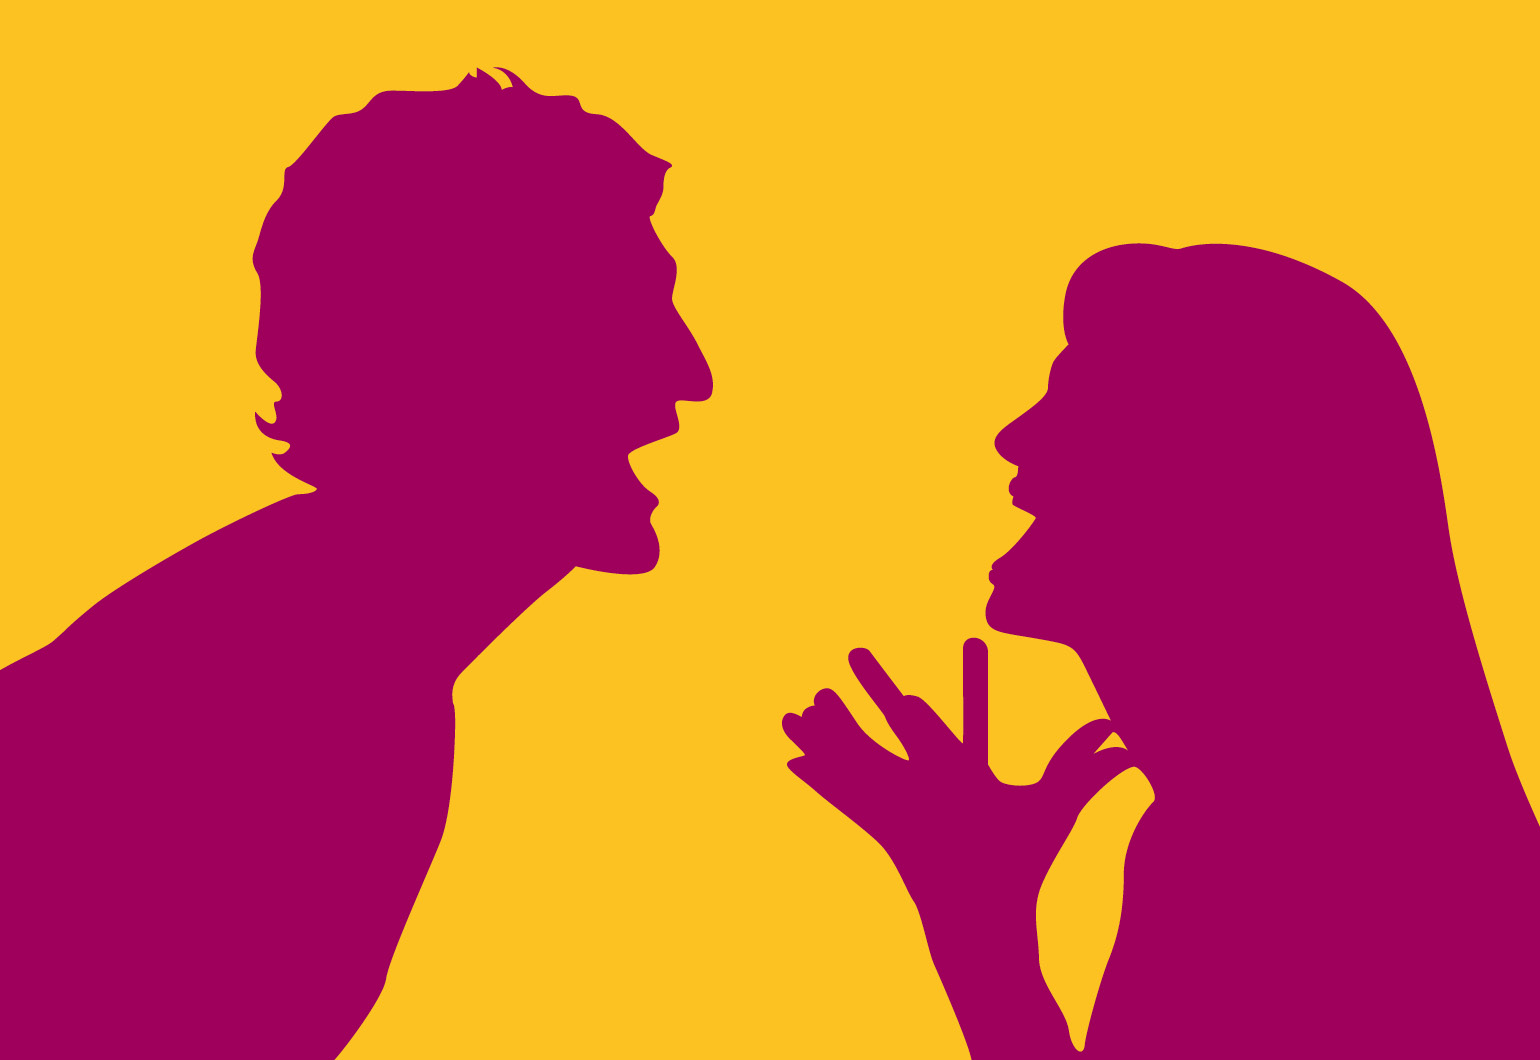 Illustration. Serious argument: a woman and a man shouting at each other. 